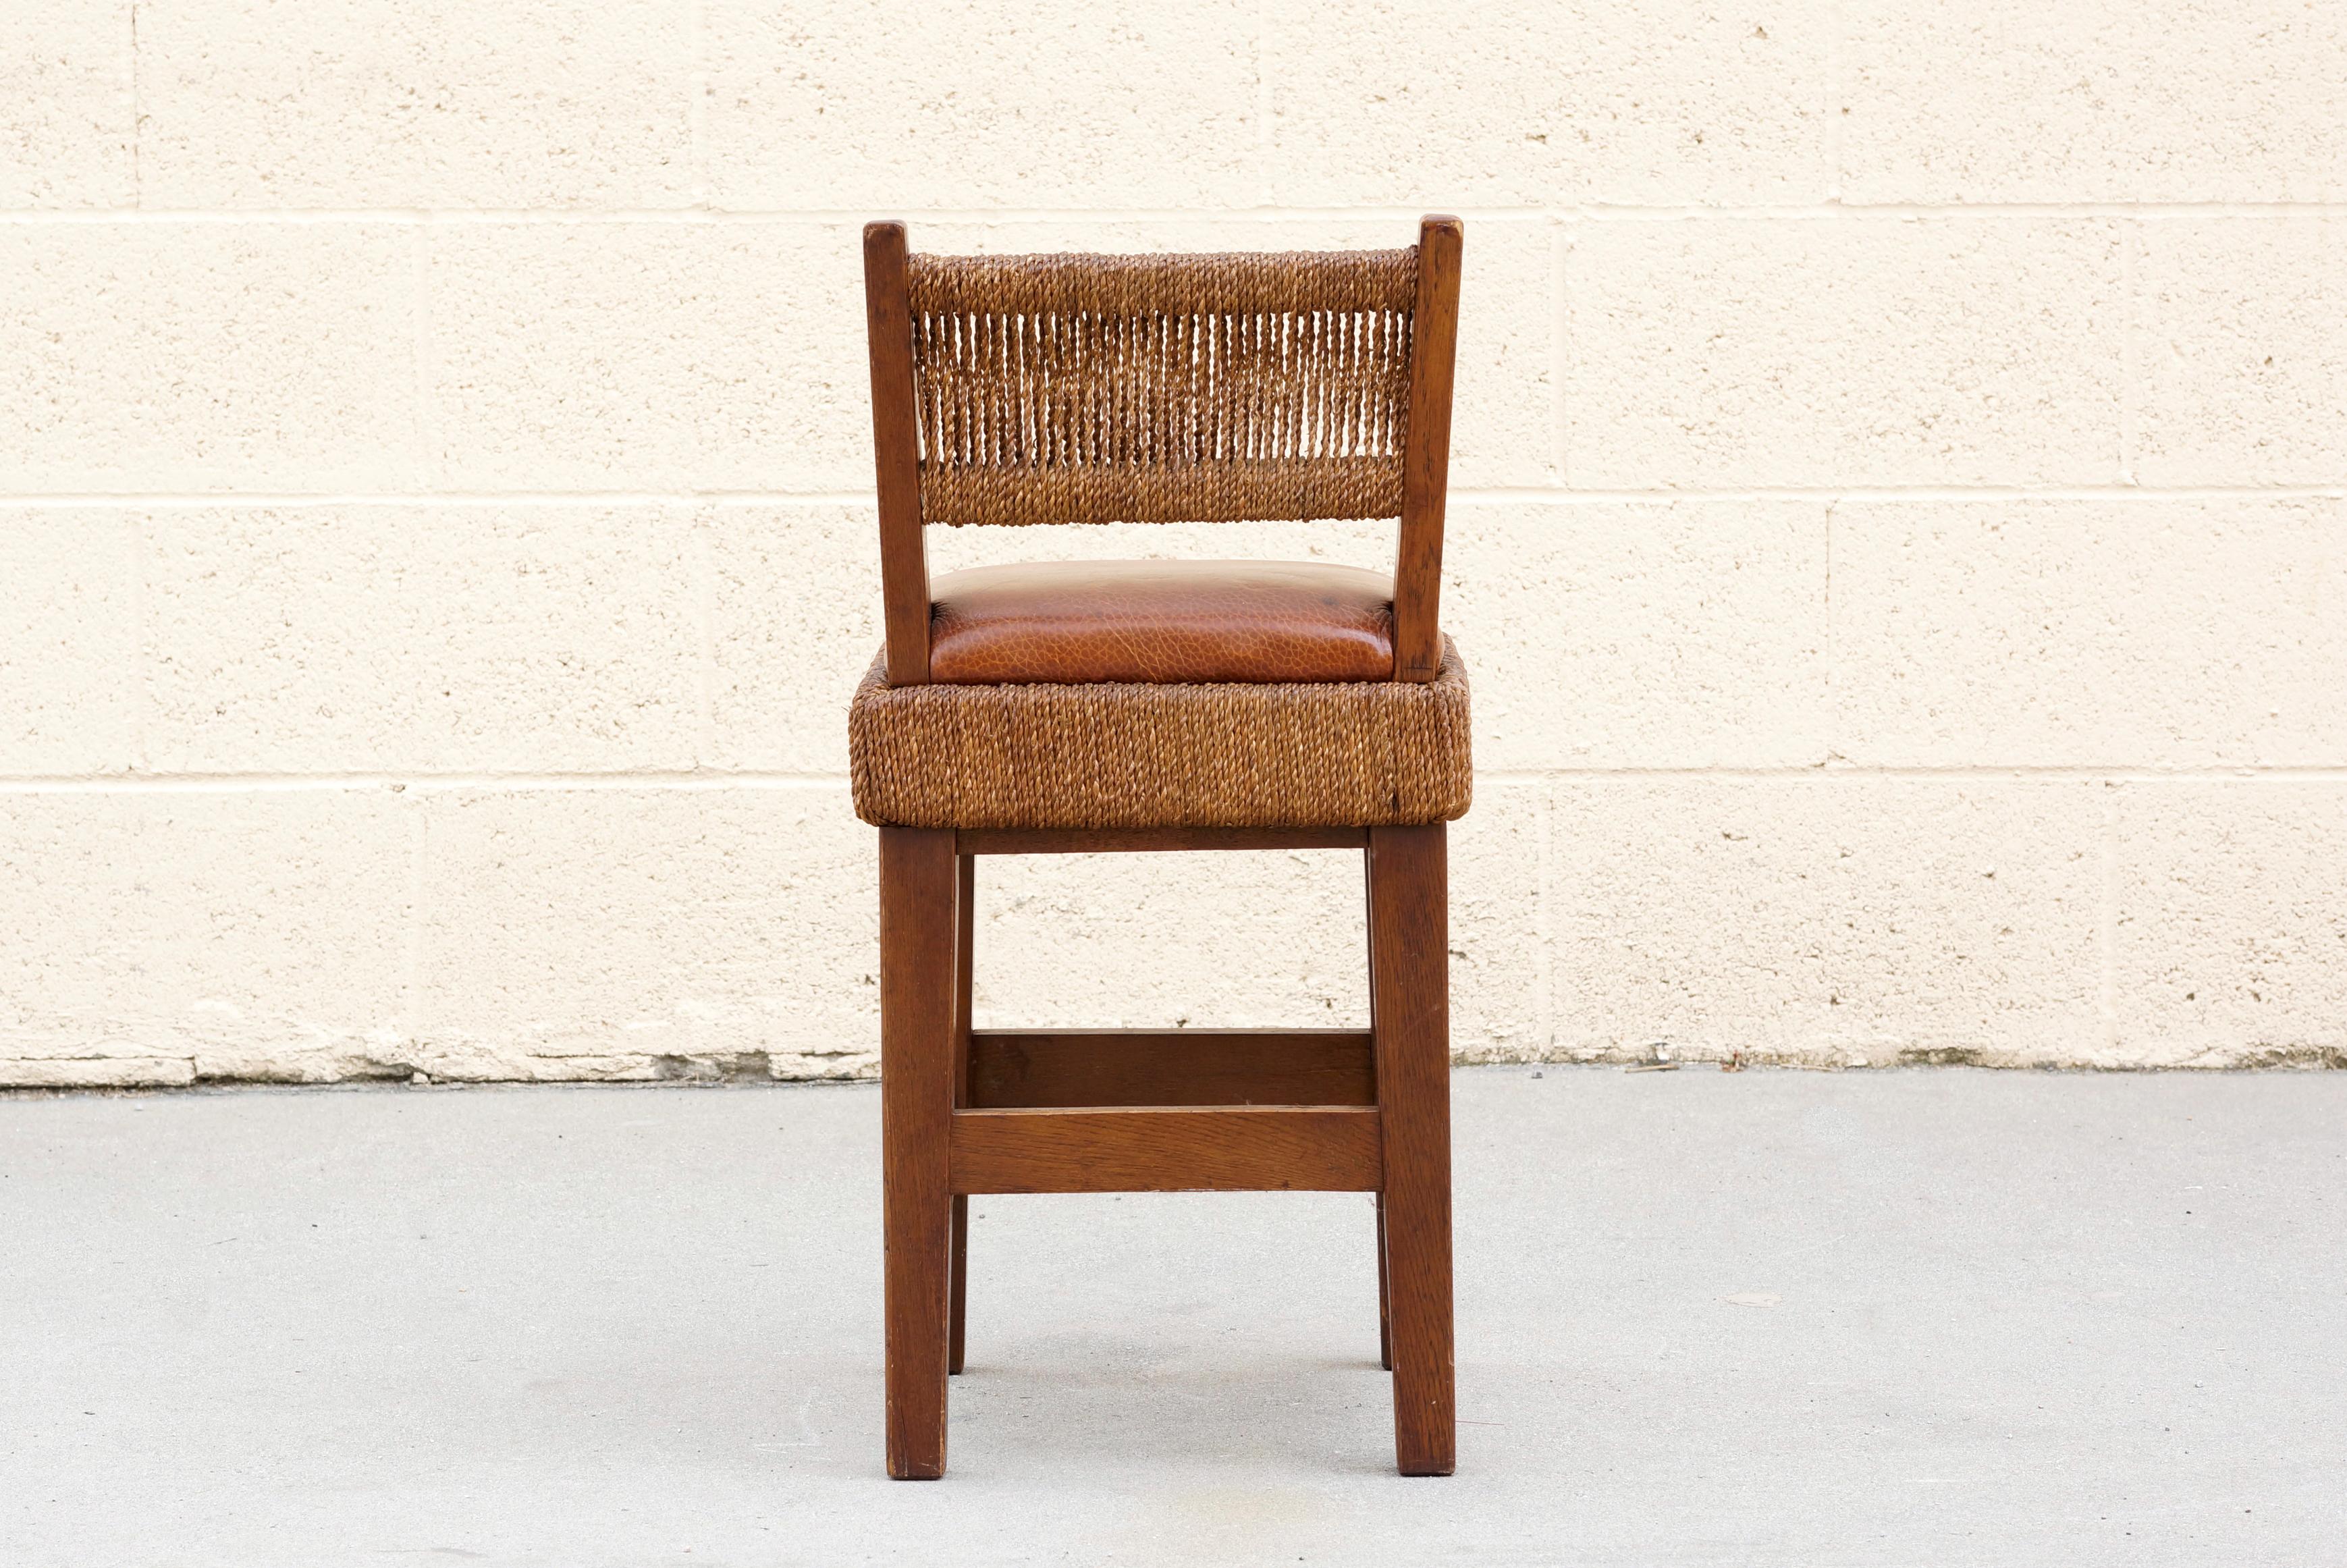 Antique Art & Crafts Movement Childs Chair In Good Condition For Sale In Alhambra, CA